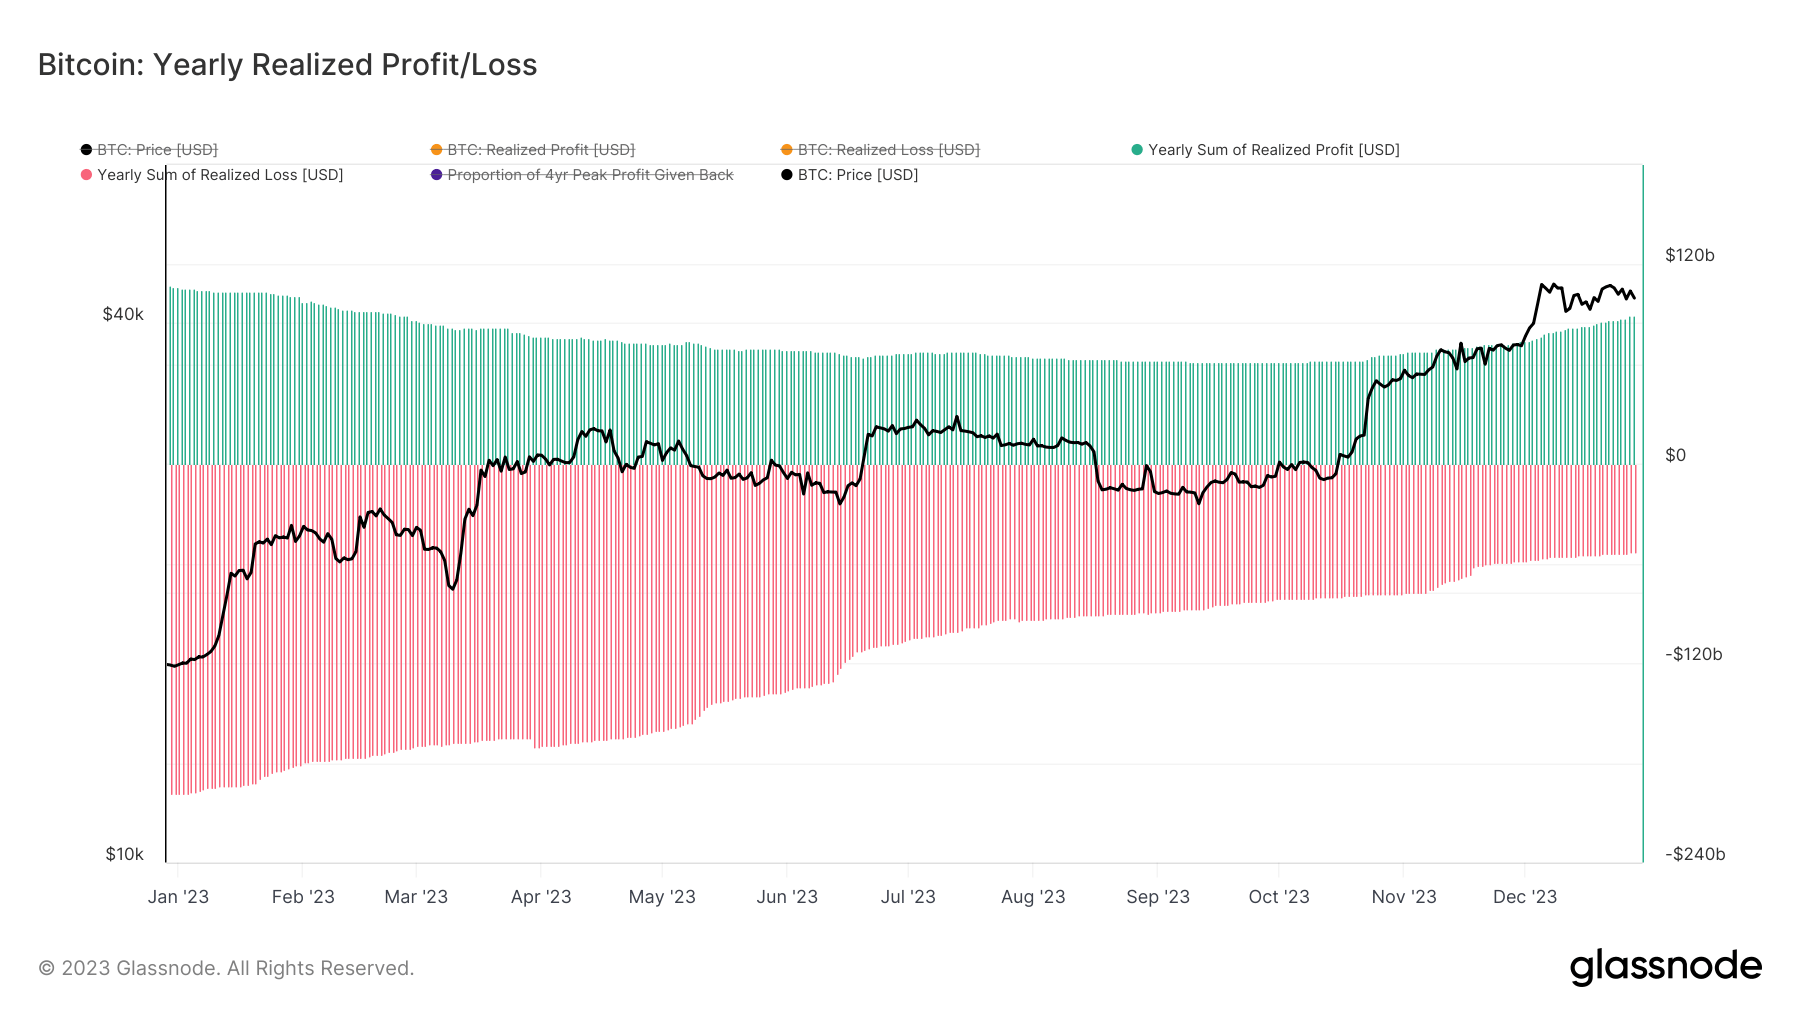 Yearly Realized Profit/Loss: (Source: Glassnode)